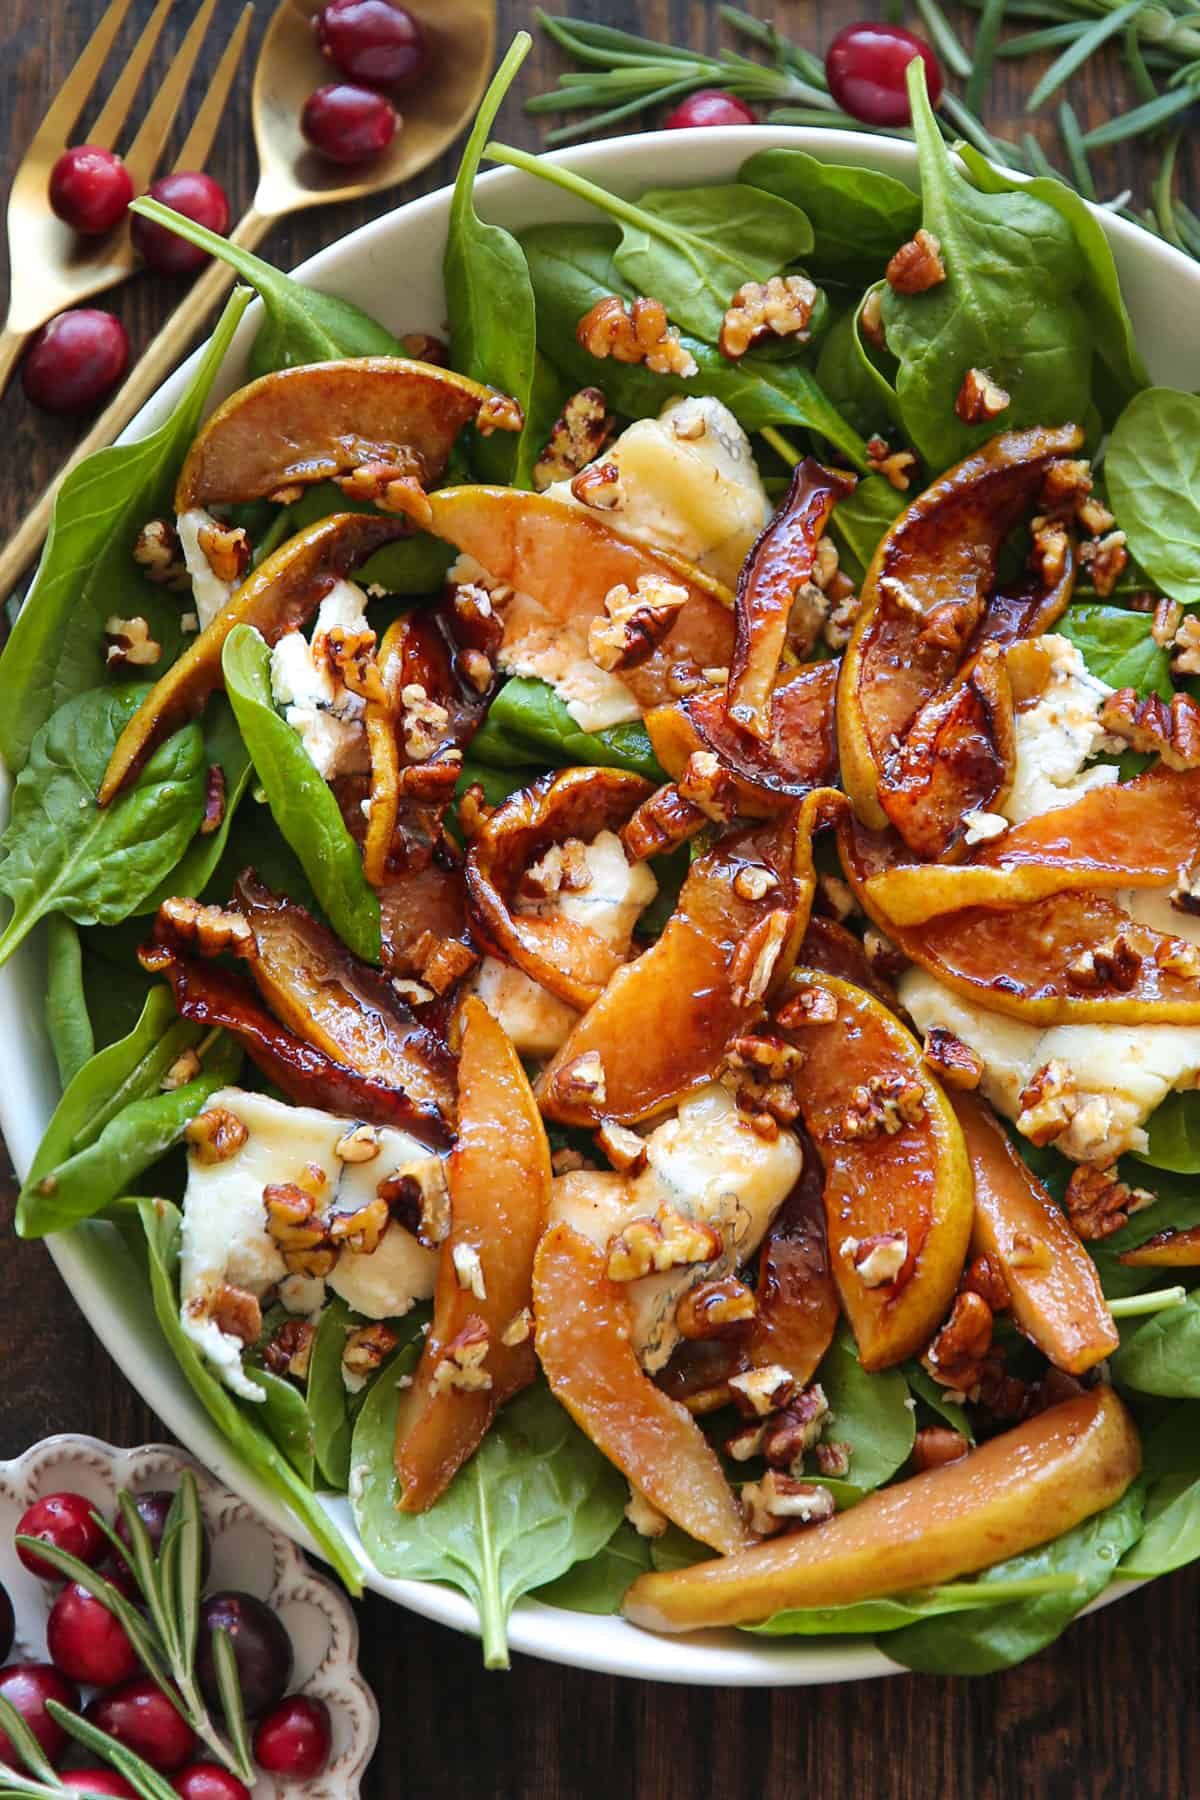 Pear Spinach Salad with Goat Cheese, Pecans, and Honey-Lemon Dressing - in a white bowl.